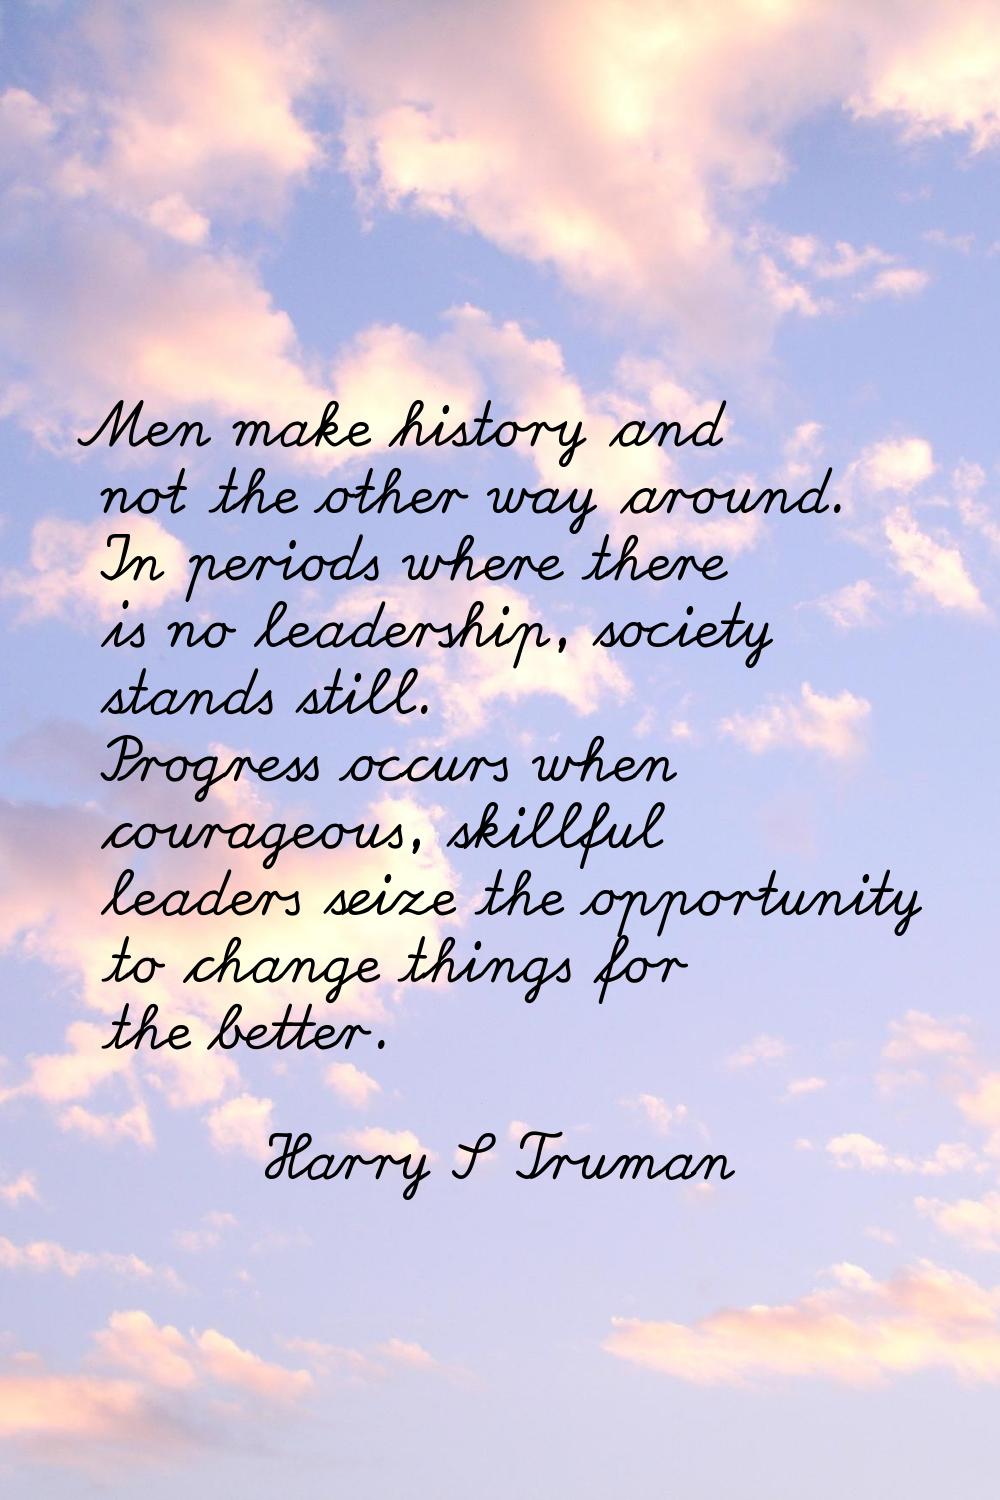 Men make history and not the other way around. In periods where there is no leadership, society sta